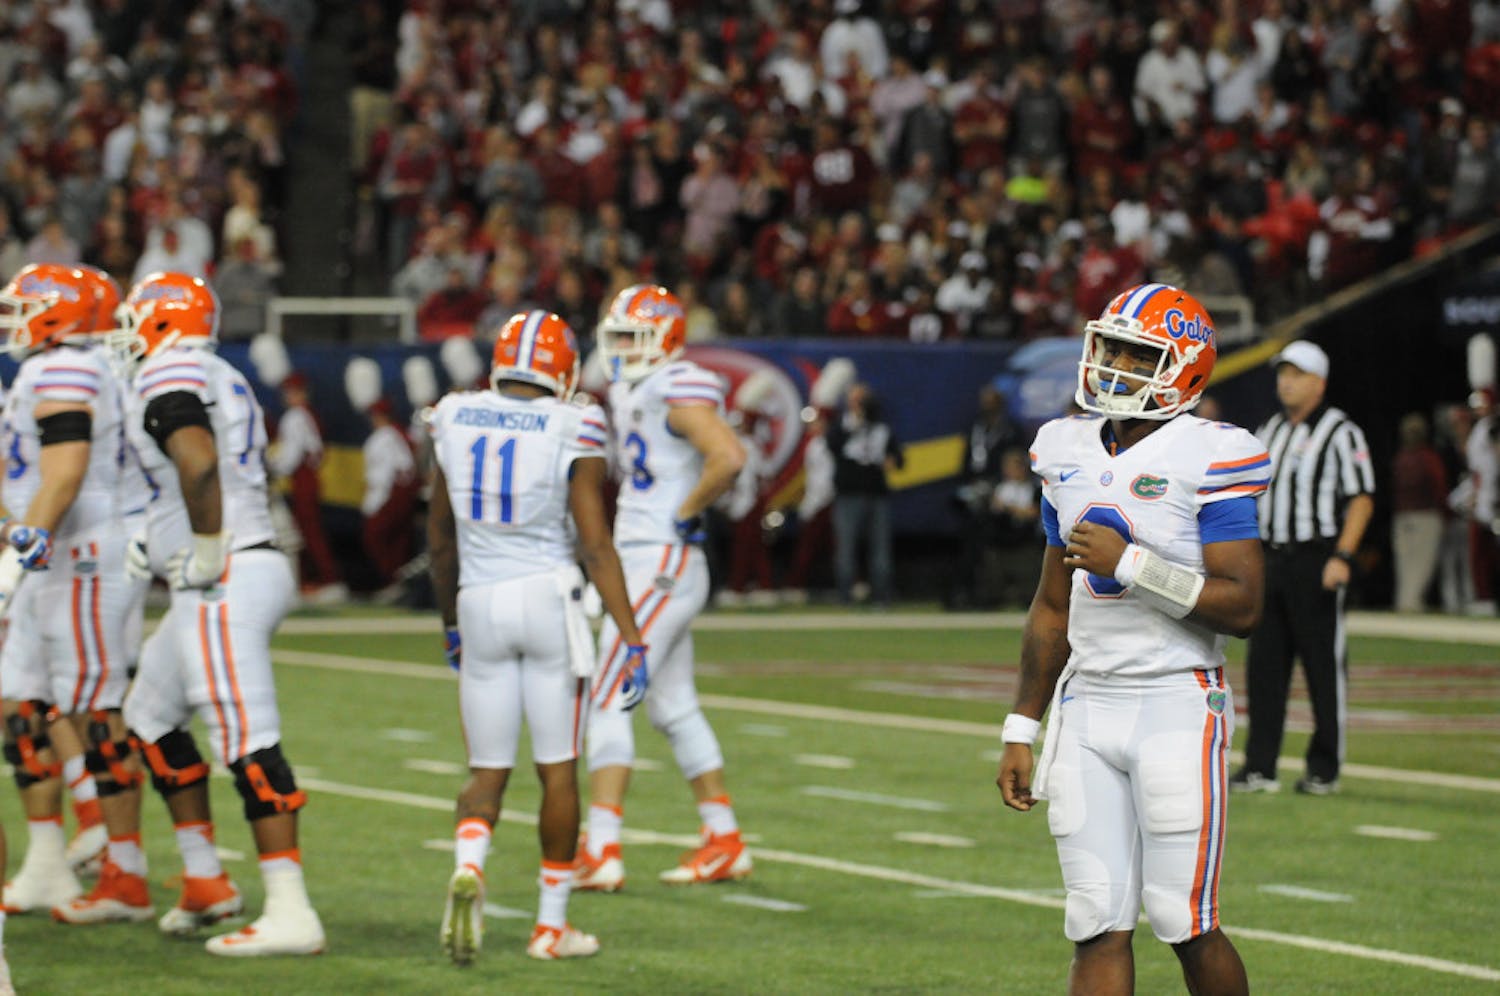 Treon Harris looks on during Florida's 27-2 loss to Florida State at the 2015 SEC Championship Game in Atlanta.